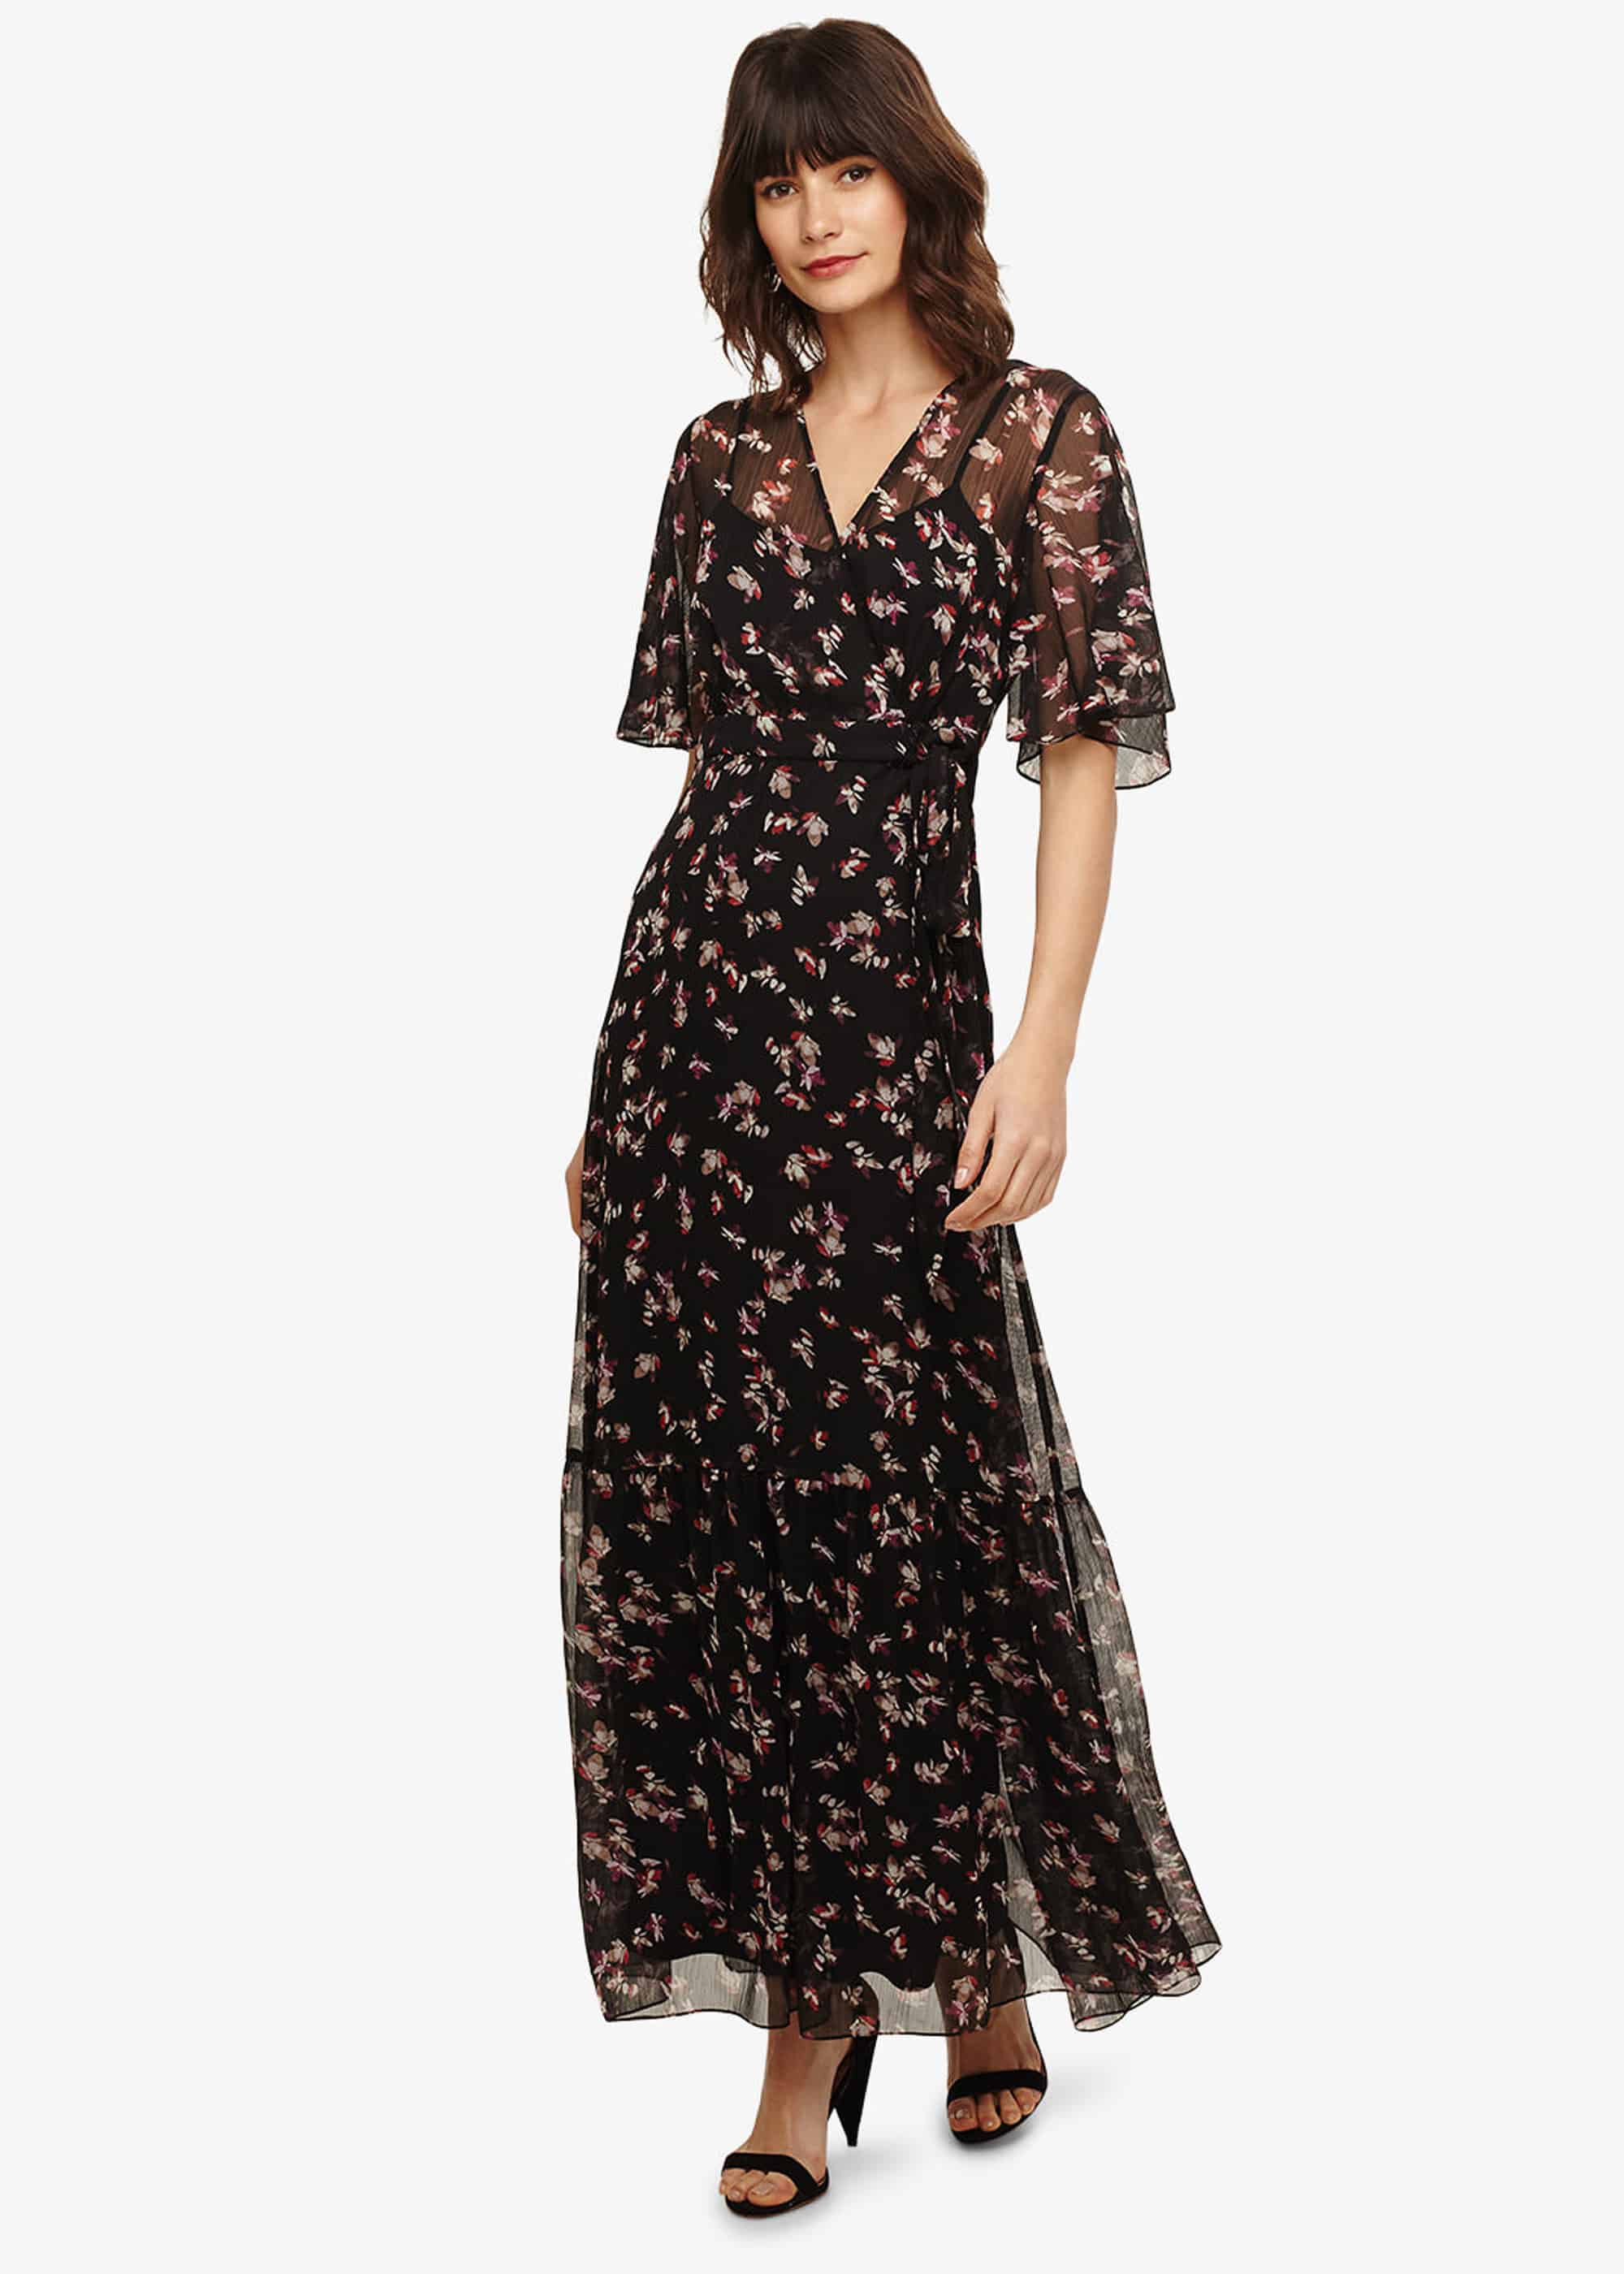 Pemberly Floral Maxi Dress | Phase Eight